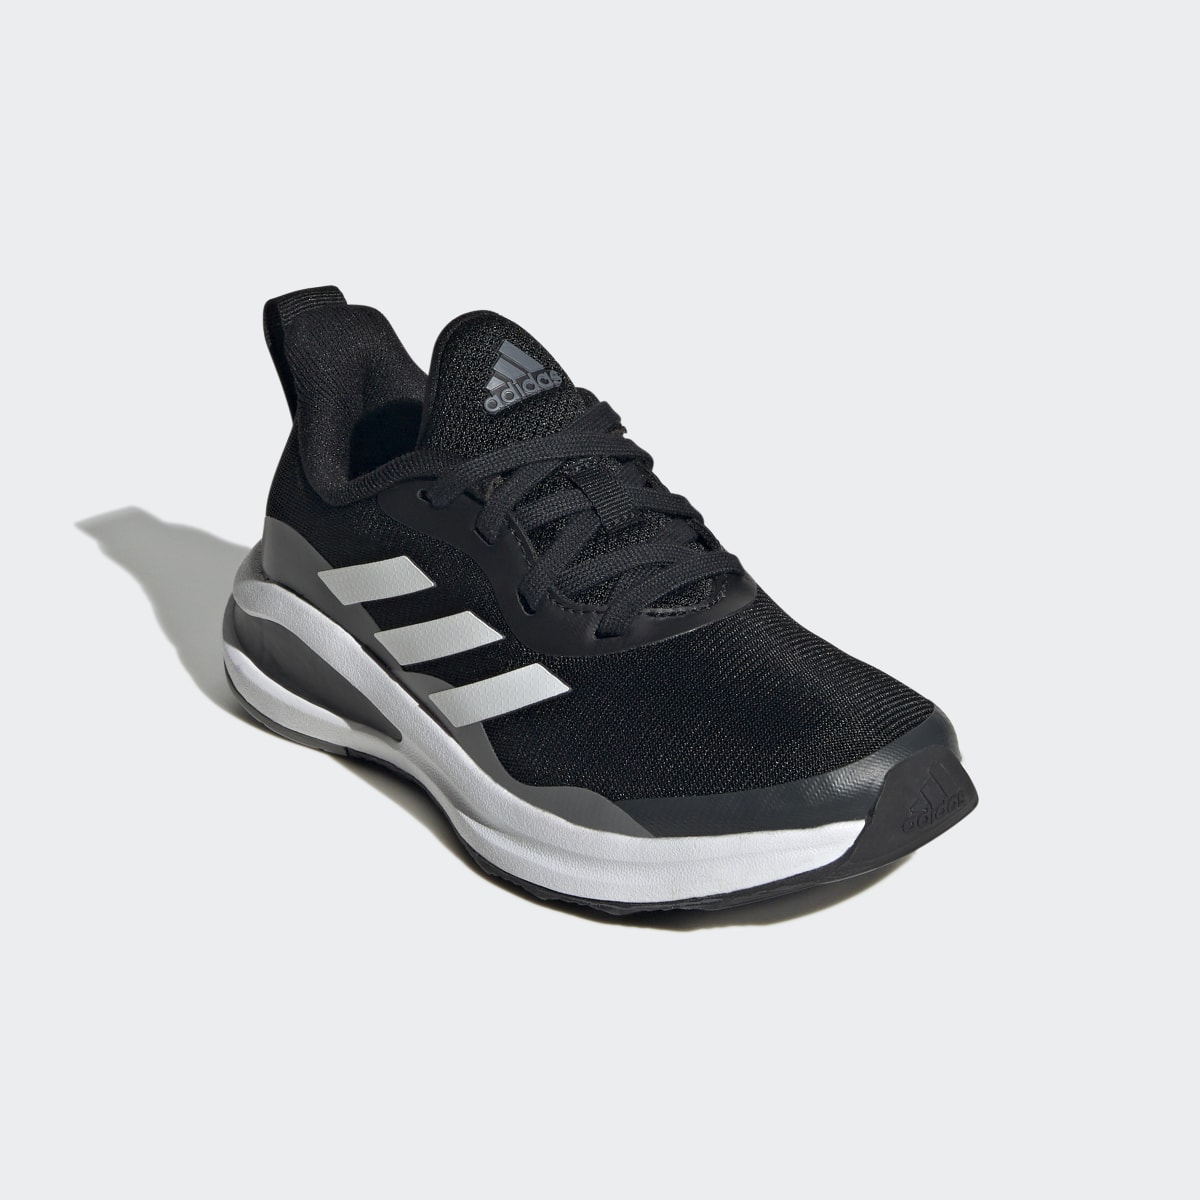 Adidas FortaRun Sport Running Lace Shoes. 5